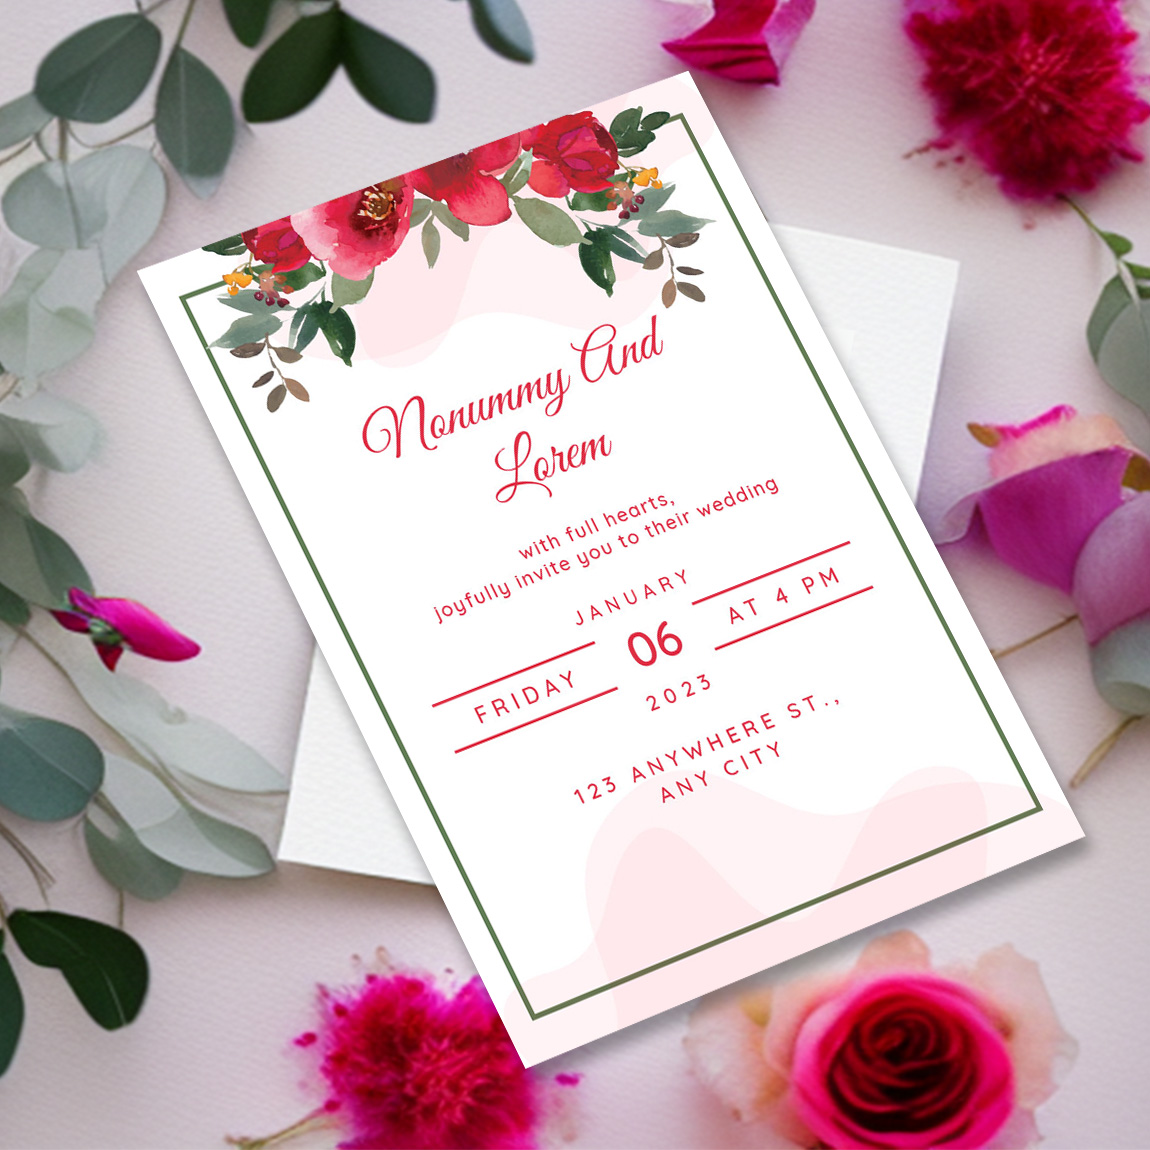 Image of charming wedding invitation with watercolor flowers.